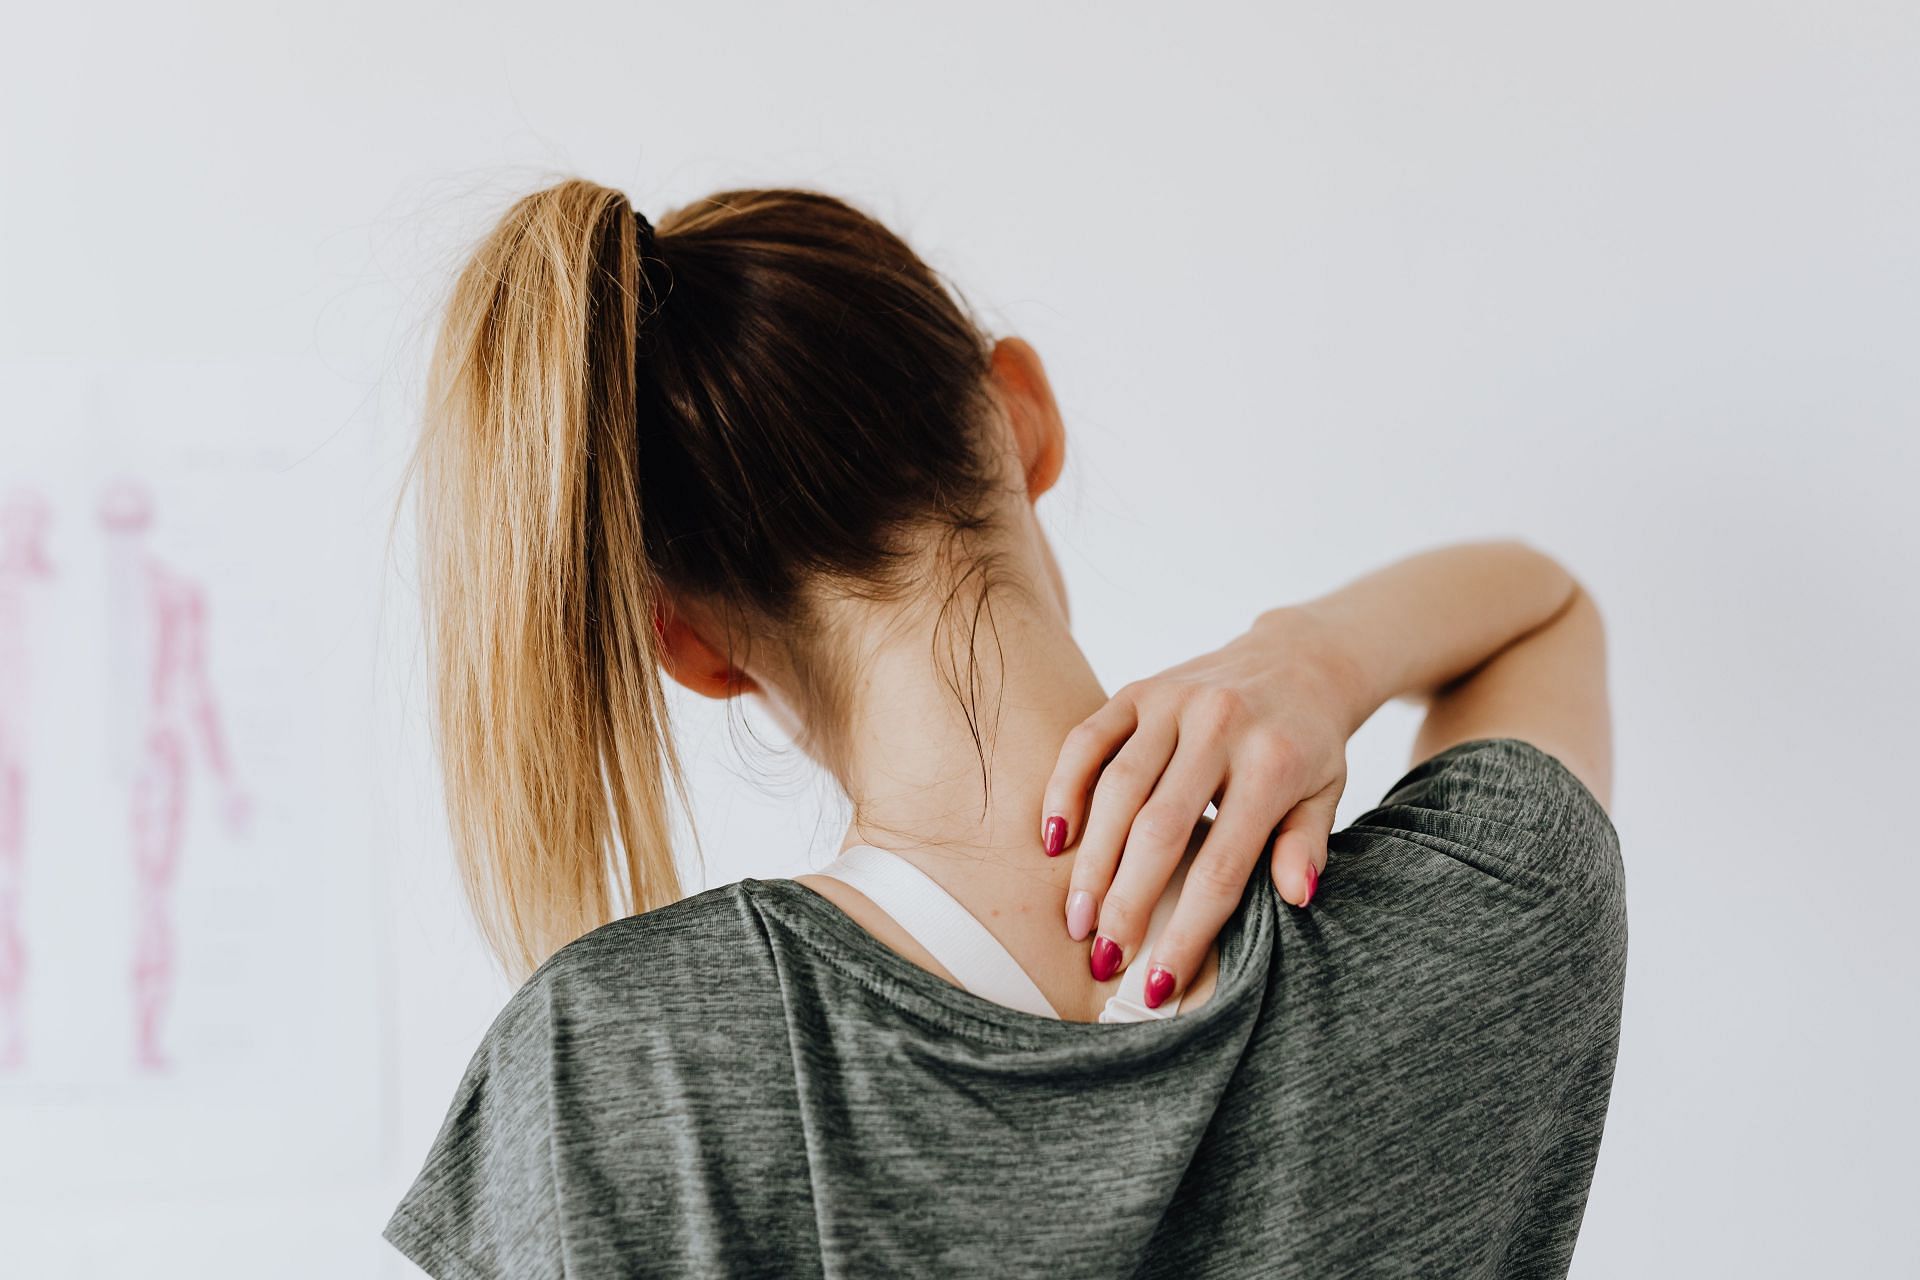 An itchy back can be excruciating, especially when you can